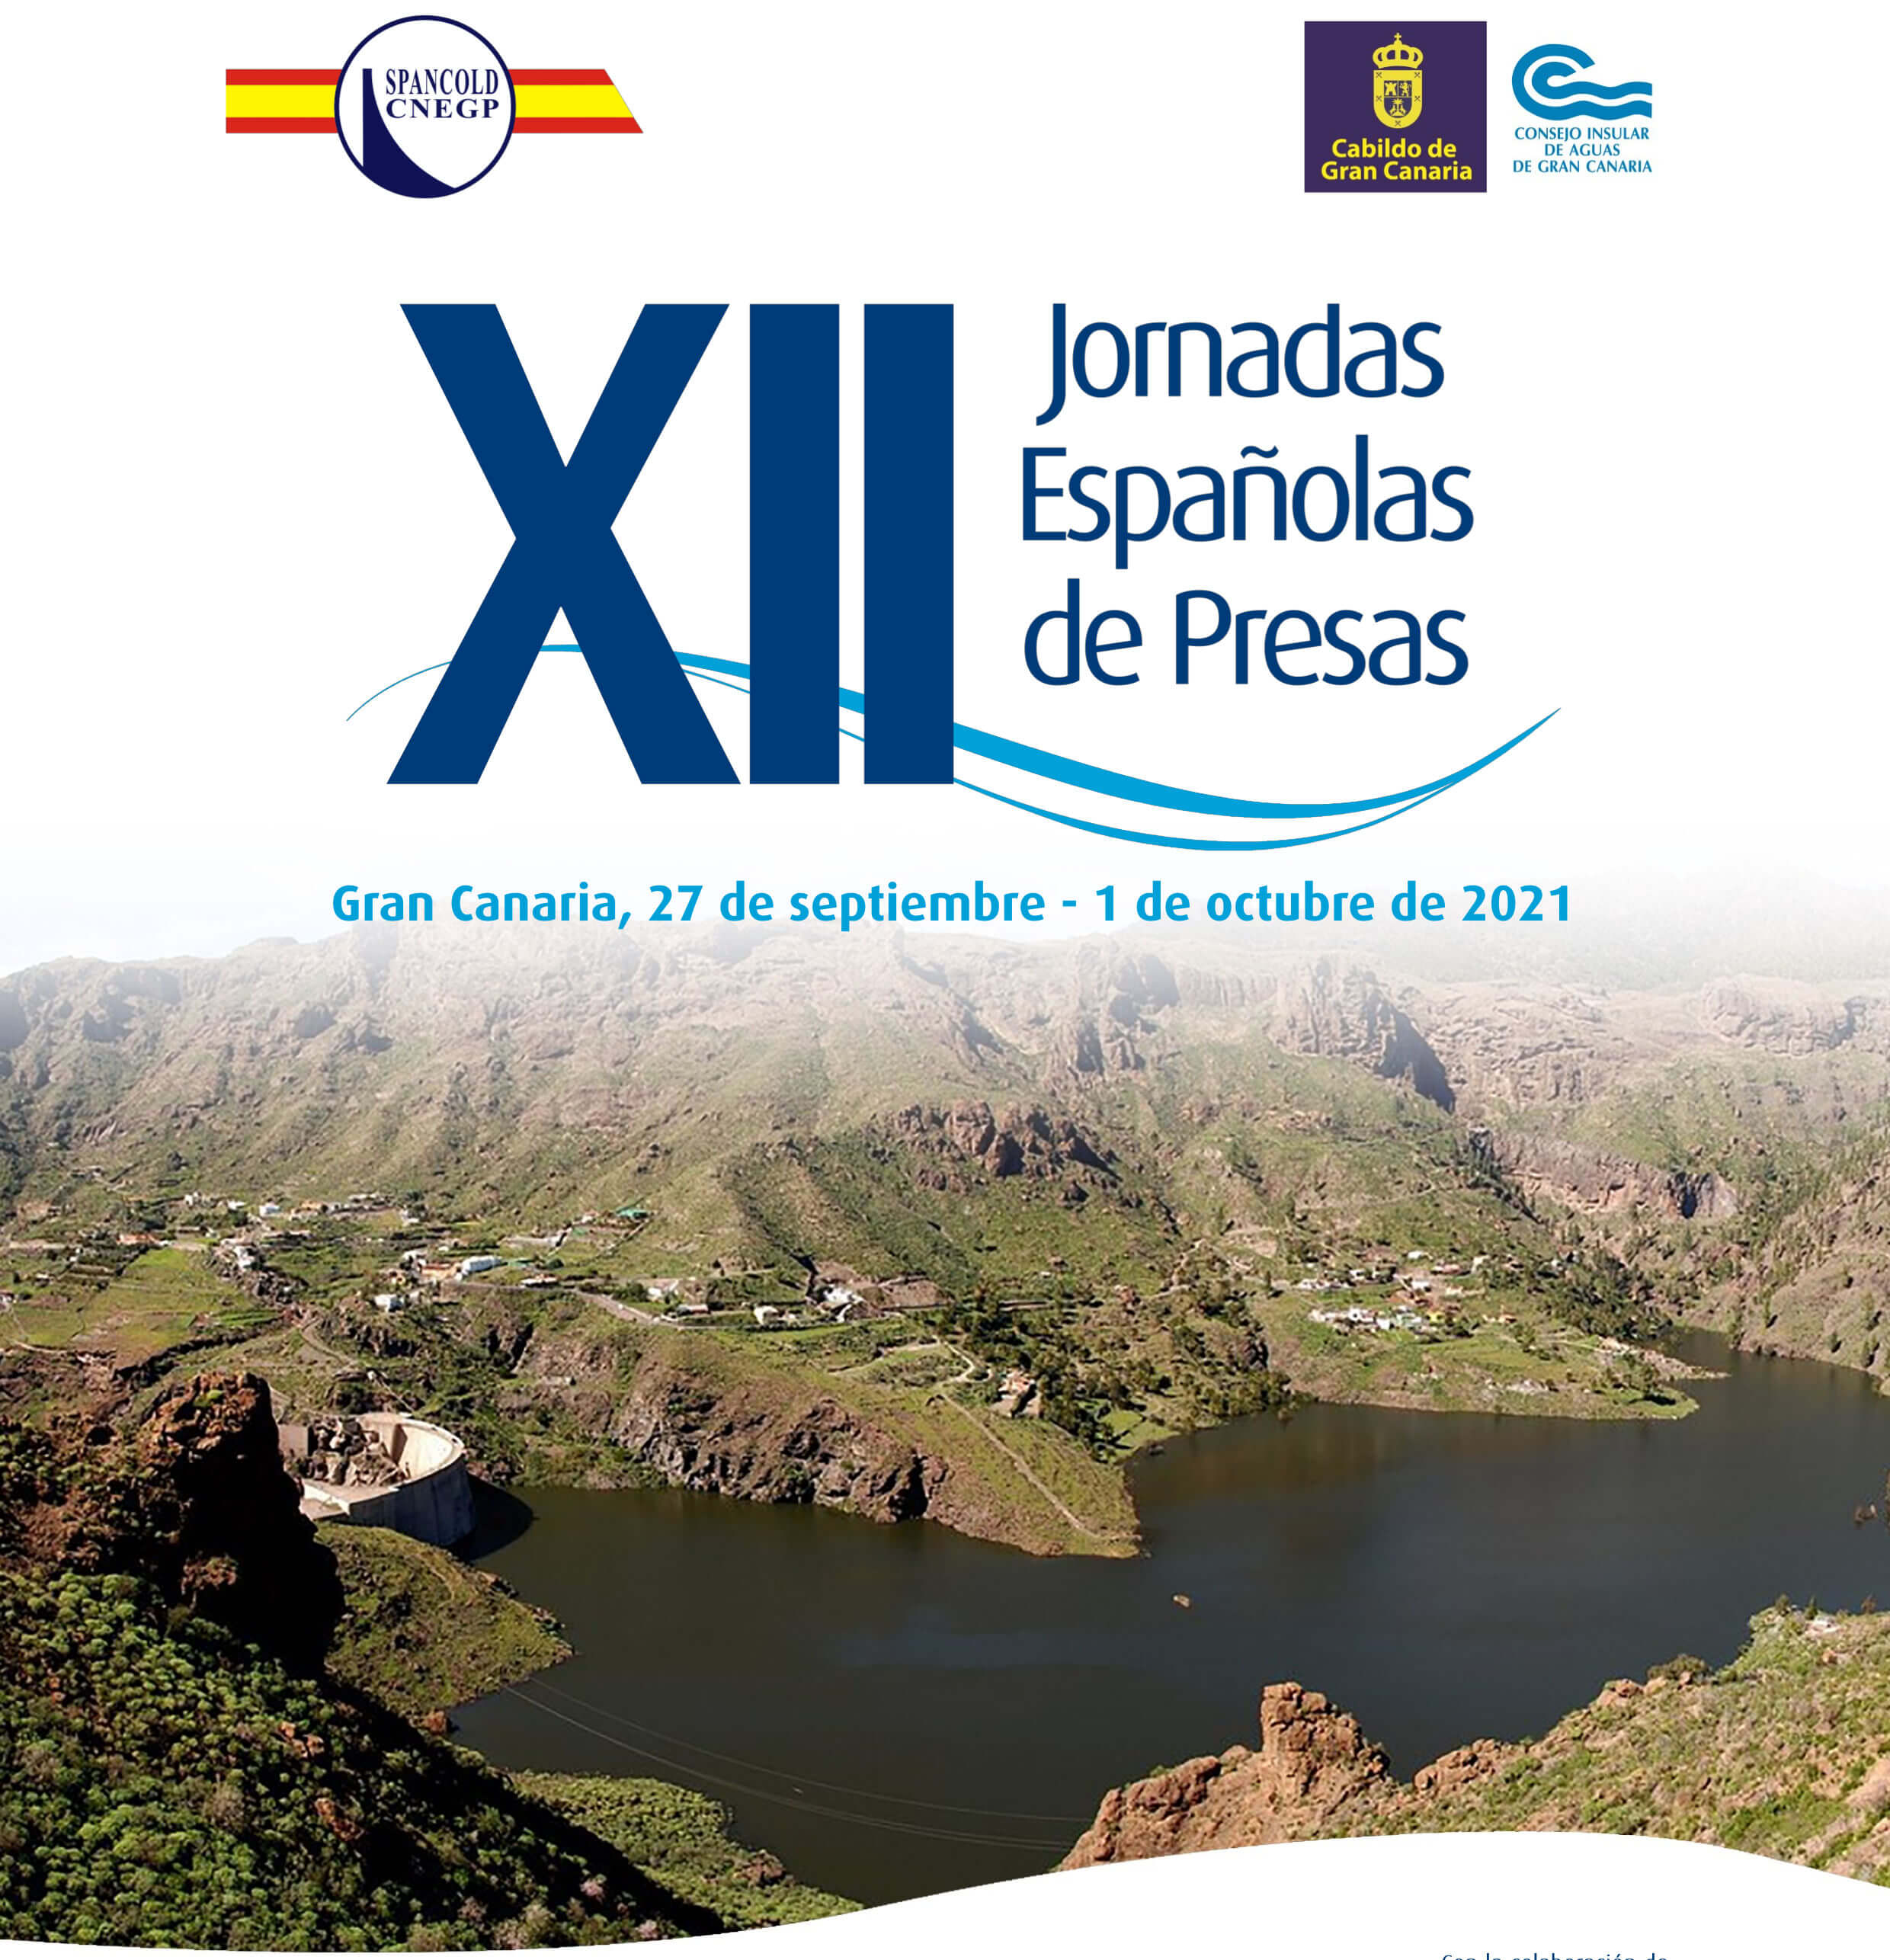 HCC has actively participated in the XII Dam Conferences held by Spancold in Las Palmas de Gran Canaria.